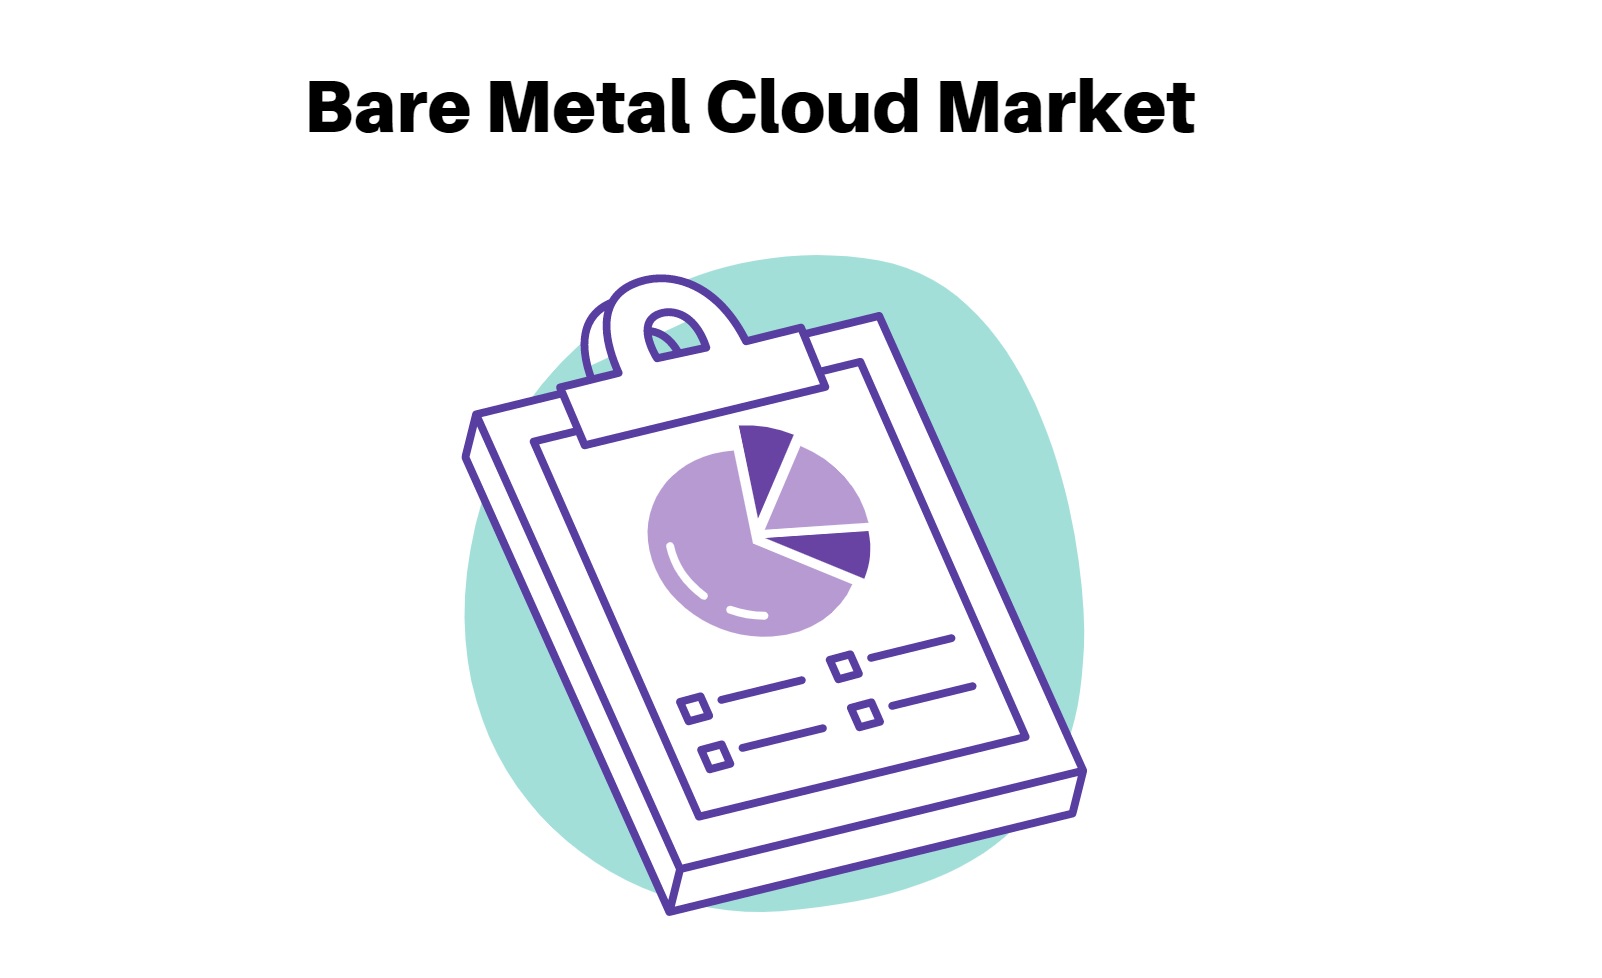 Bare Metal Cloud Market is Predicted to reach USD 60 billion | Excluding the Impact of Inflation by 2032